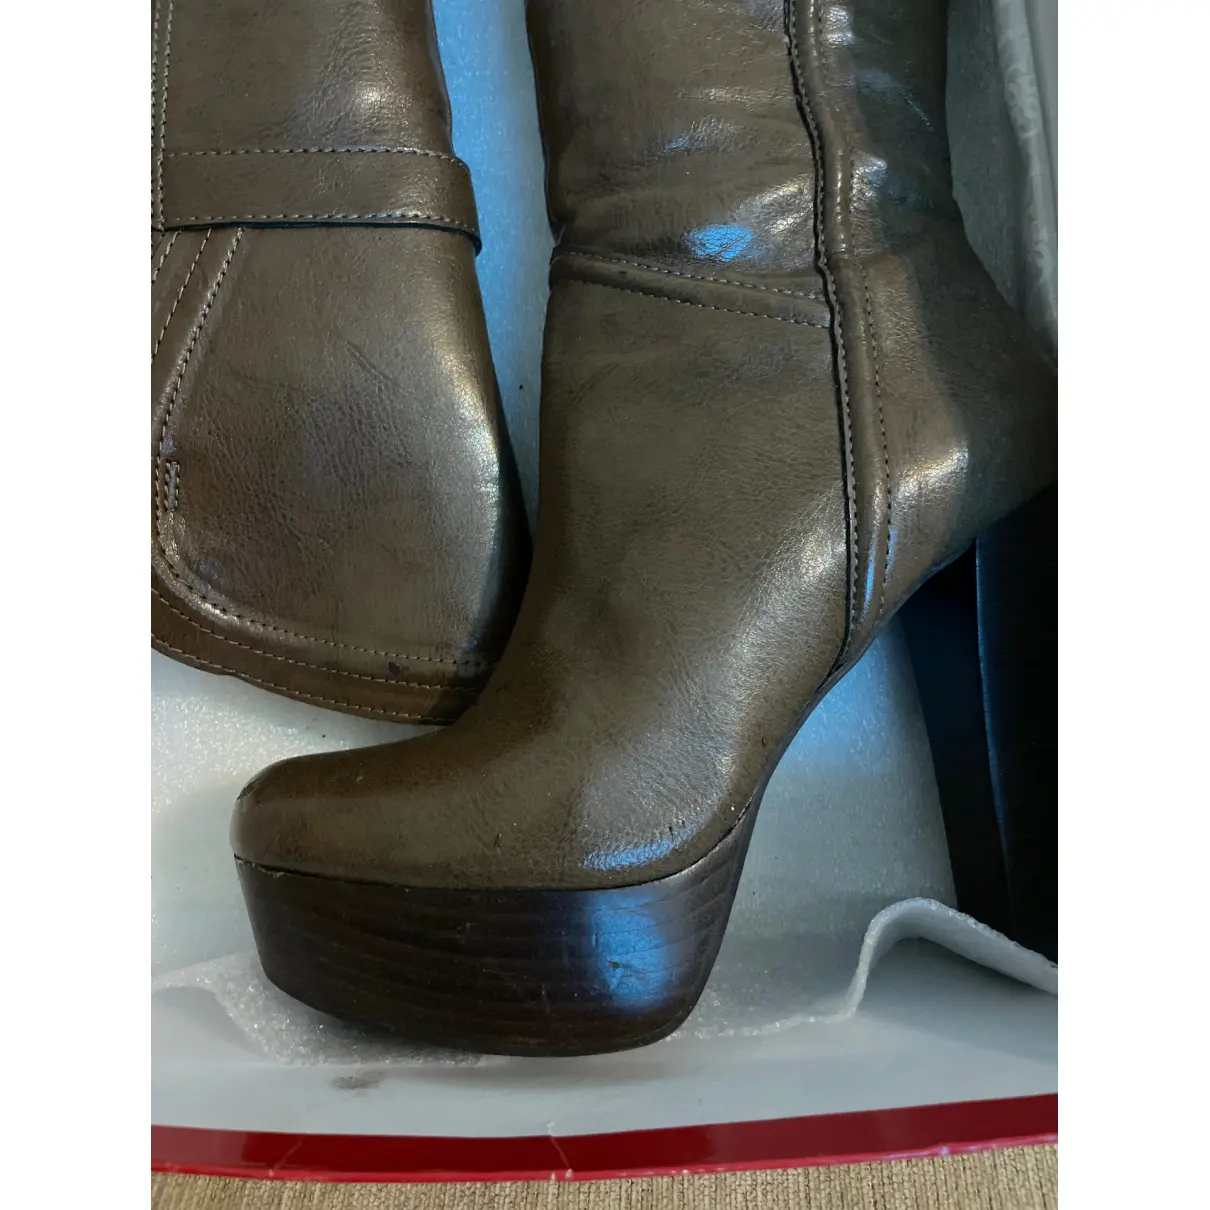 Buy GUESS Patent leather boots online